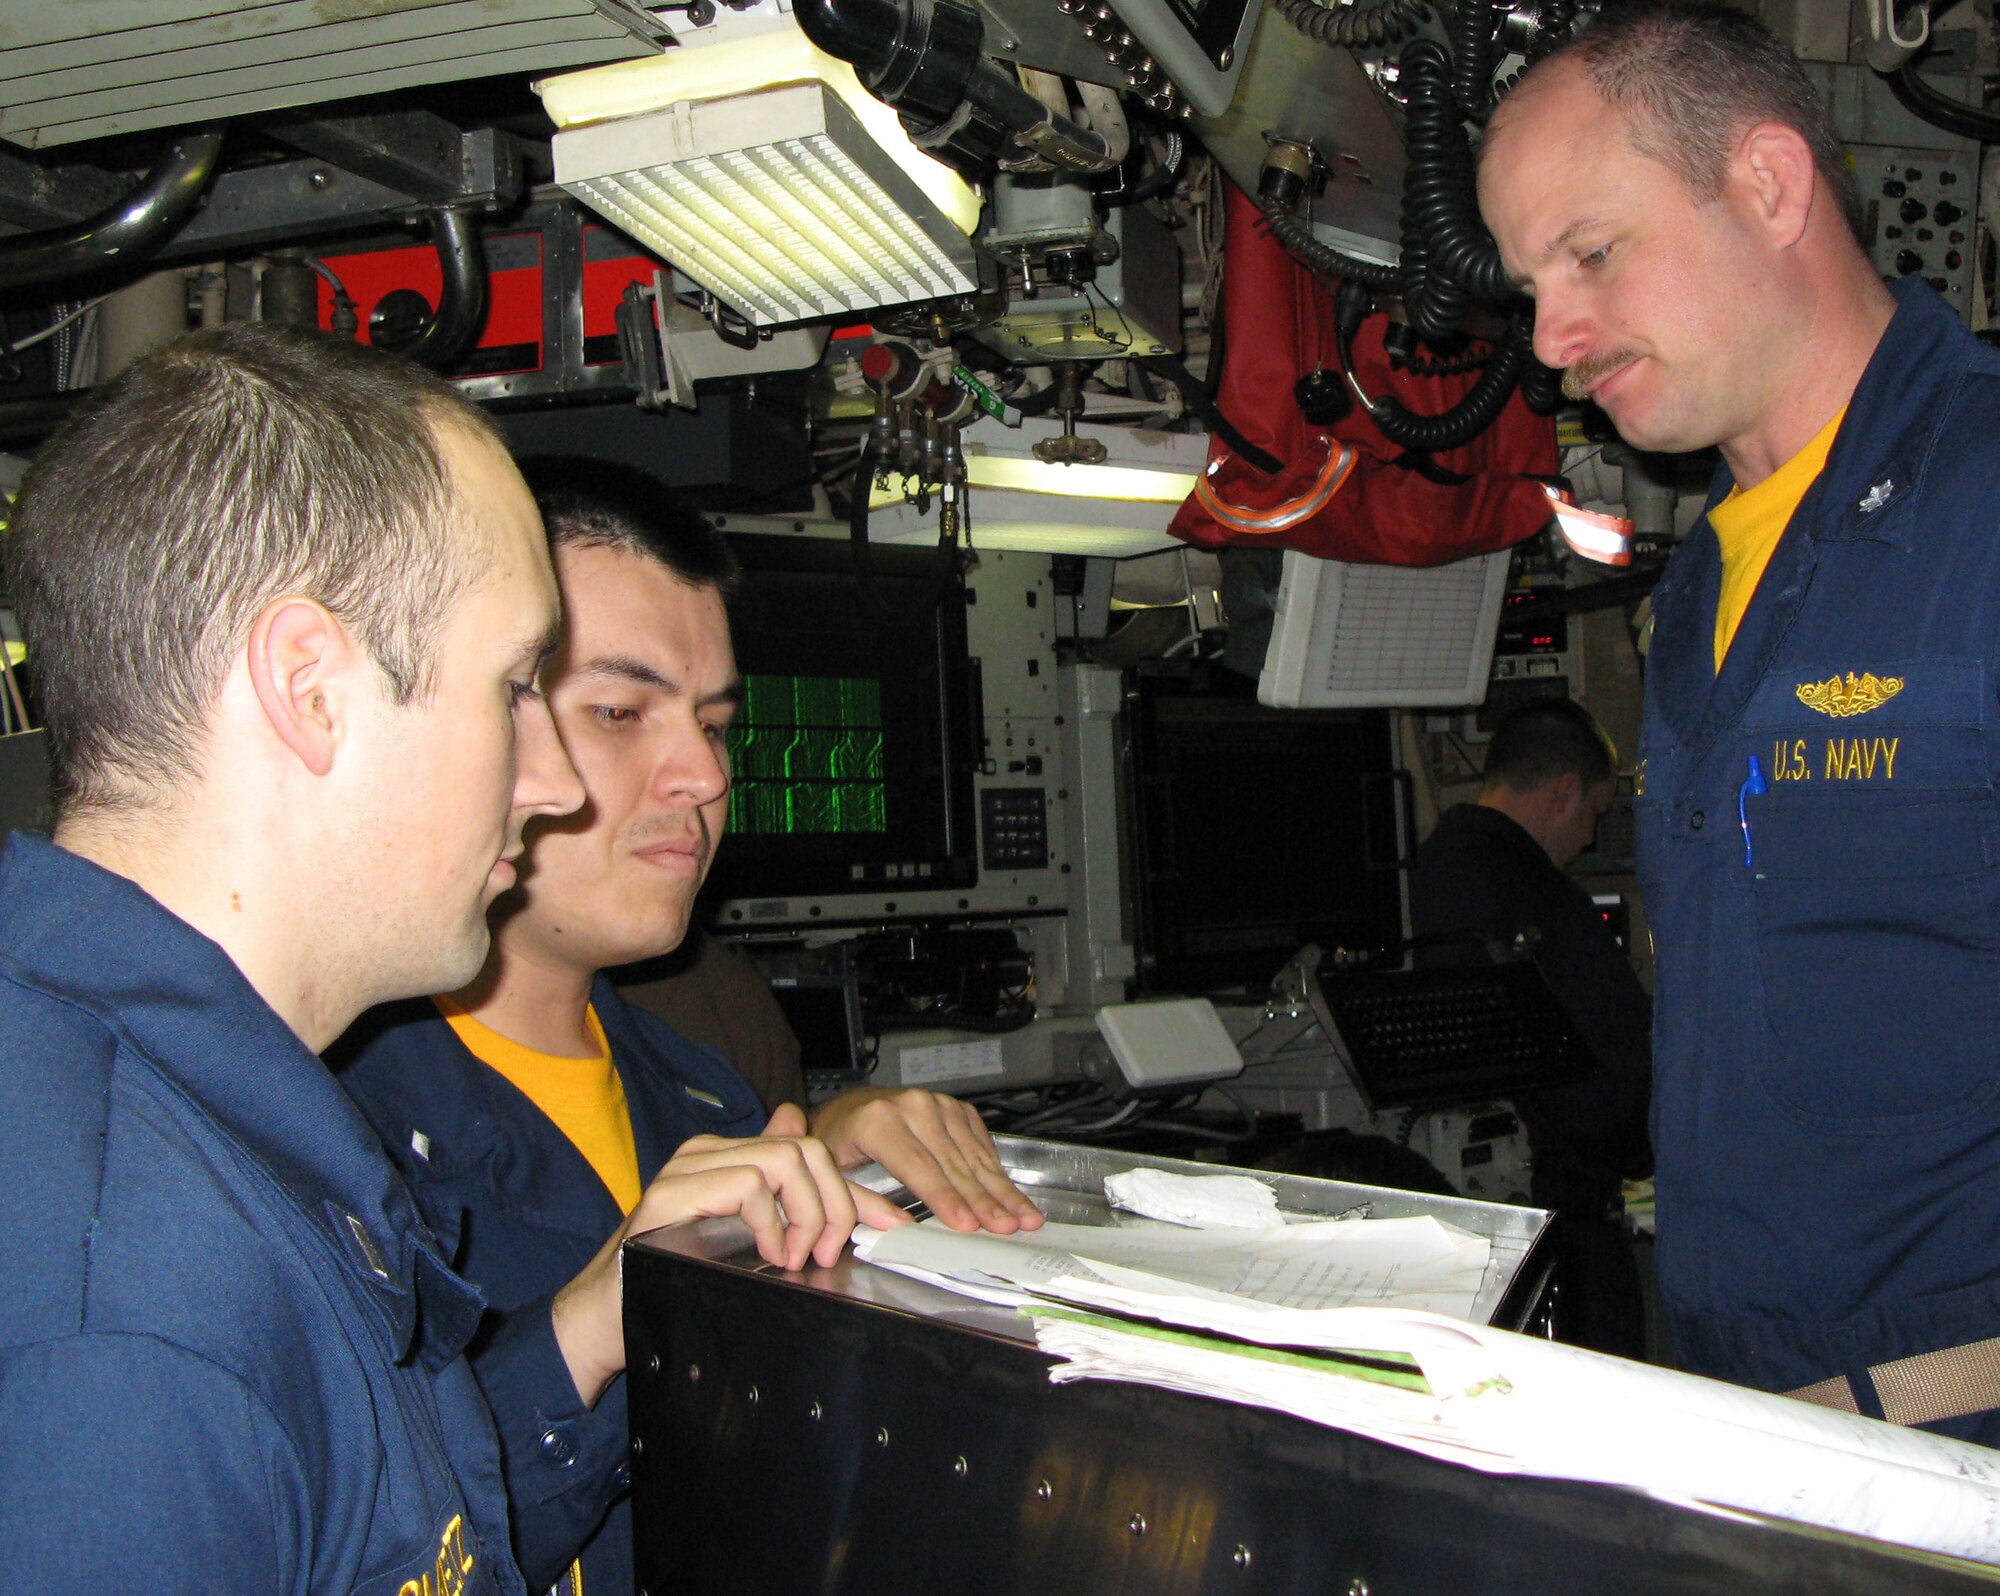 Navy Lt. j.g. Jeremy Smeltz (from left) and Lt. j.g. Juan Torres report to Cmdr. Jeffrey M. Grimes, the captain of the strategic missile submarine USS Maryland, during a battle drill Feb. 16. (Department of Defense photo/Gerry J. Gilmore)